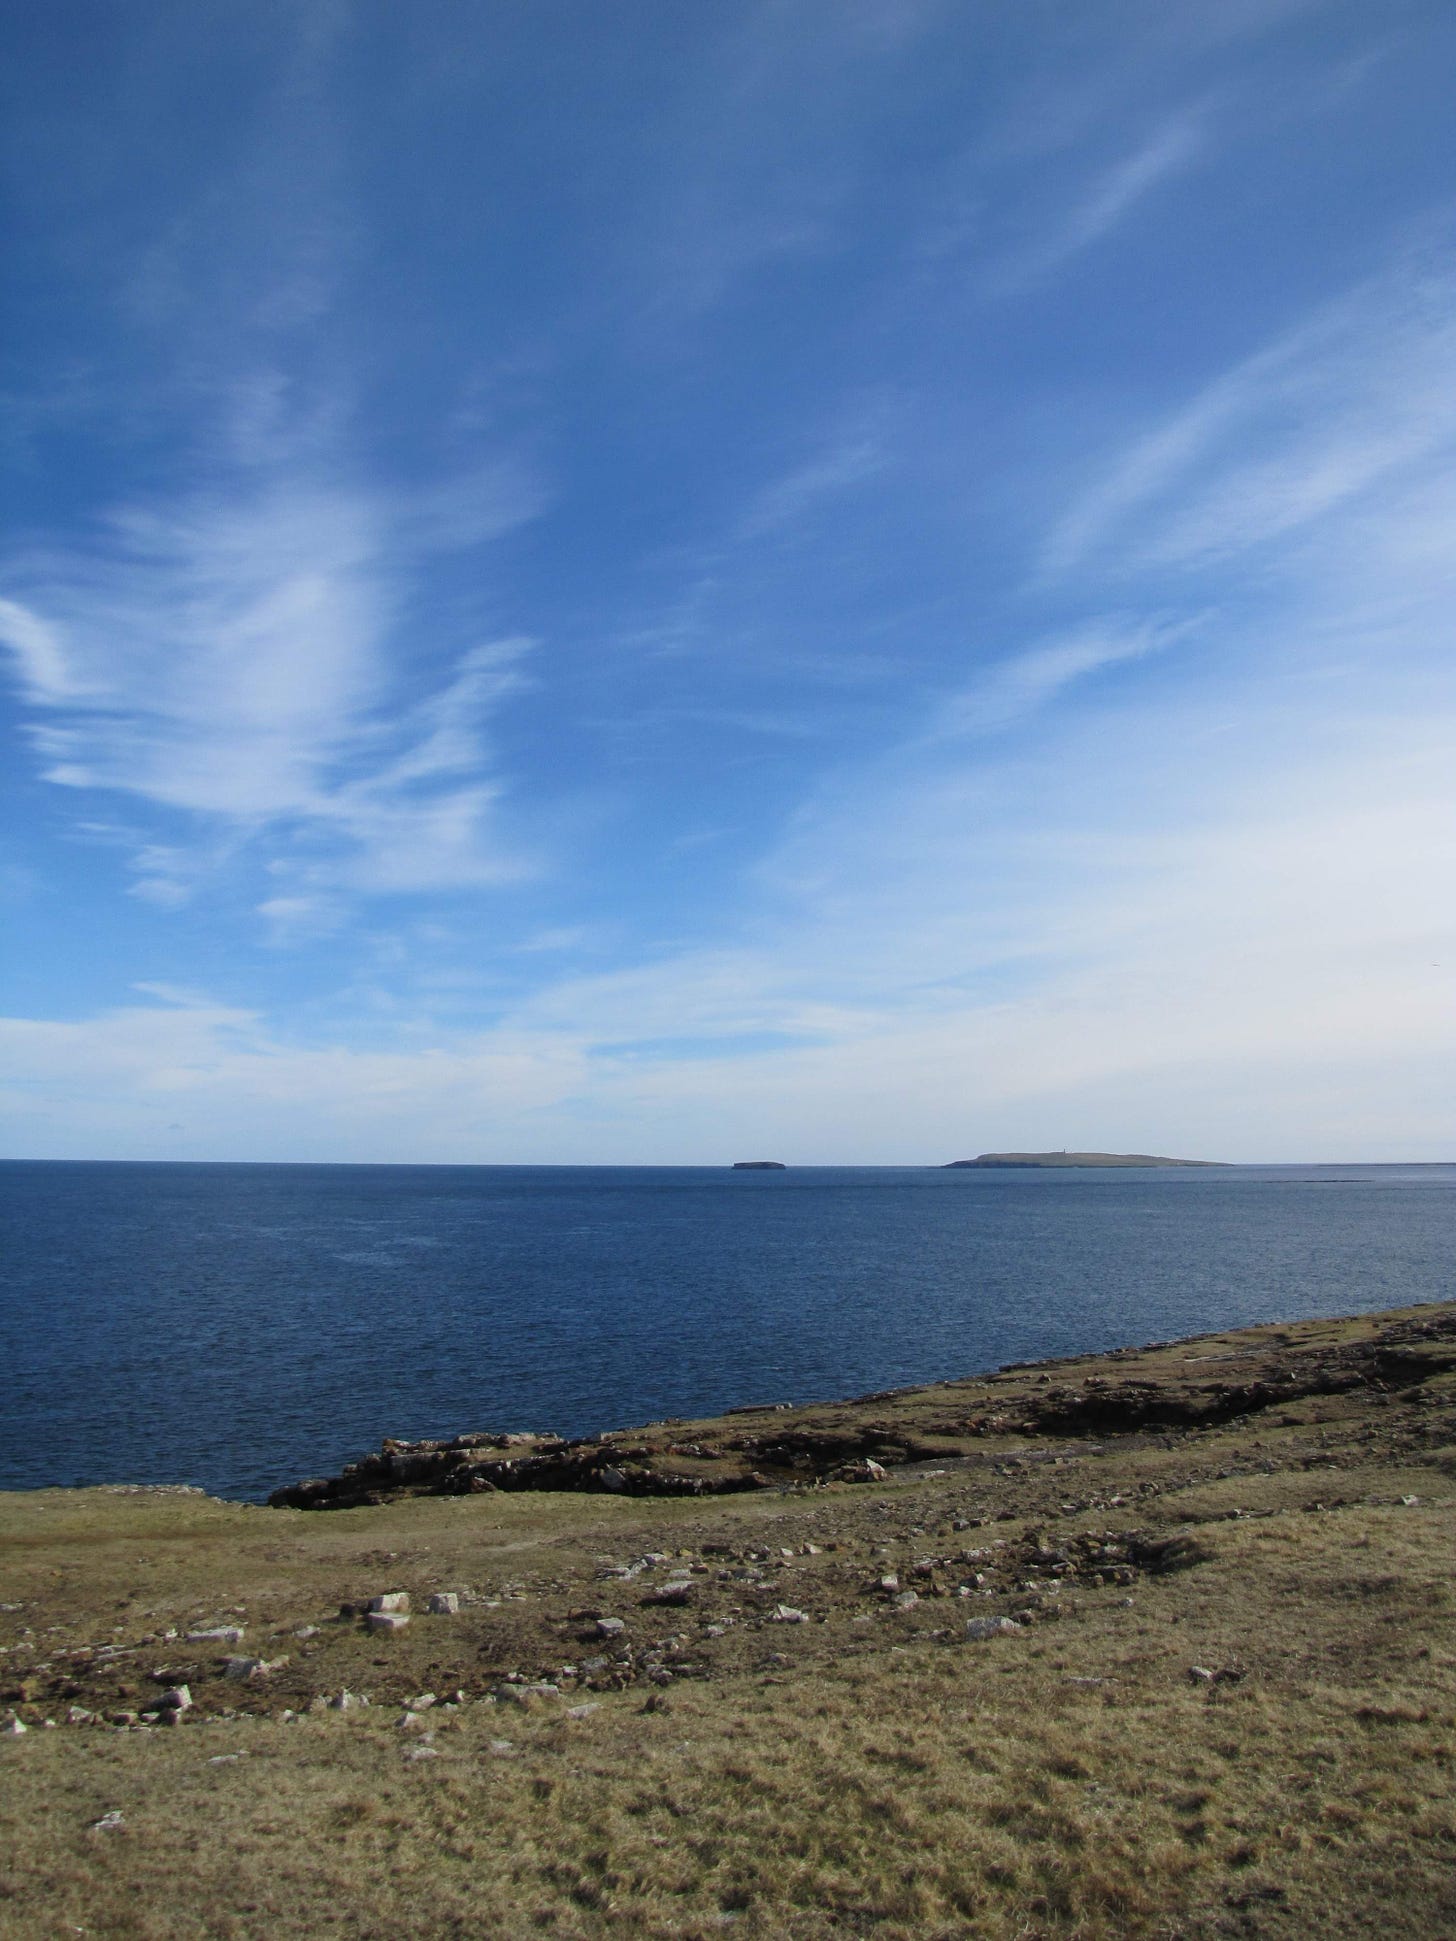 Copinsay and the horse of Copinsay in Orkney. There are two islands in the sea, with a large blue sky above, and the clifftops of Deerness in the foreground.